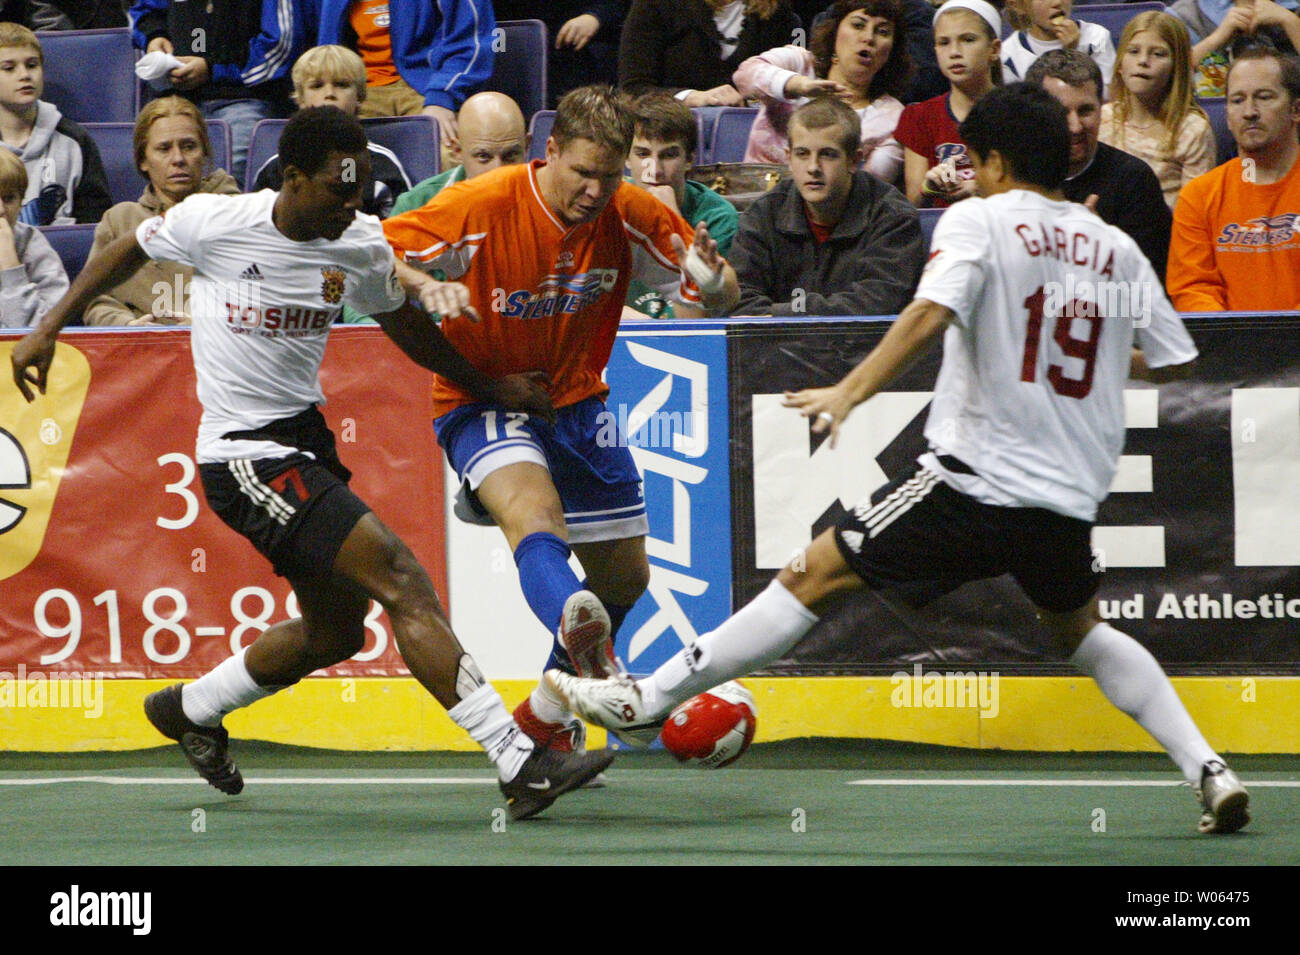 Baltimore Blast's Carlos Garcia  (R) and Joel Bailey (L) battle St. Louis Steamers Randy Sonderman for possession of the ball during the first quarter of their MISL game at the Savvis Center in St. Louis on December 16, 2005. (UPI Photo/Bill Greenblatt) Stock Photo